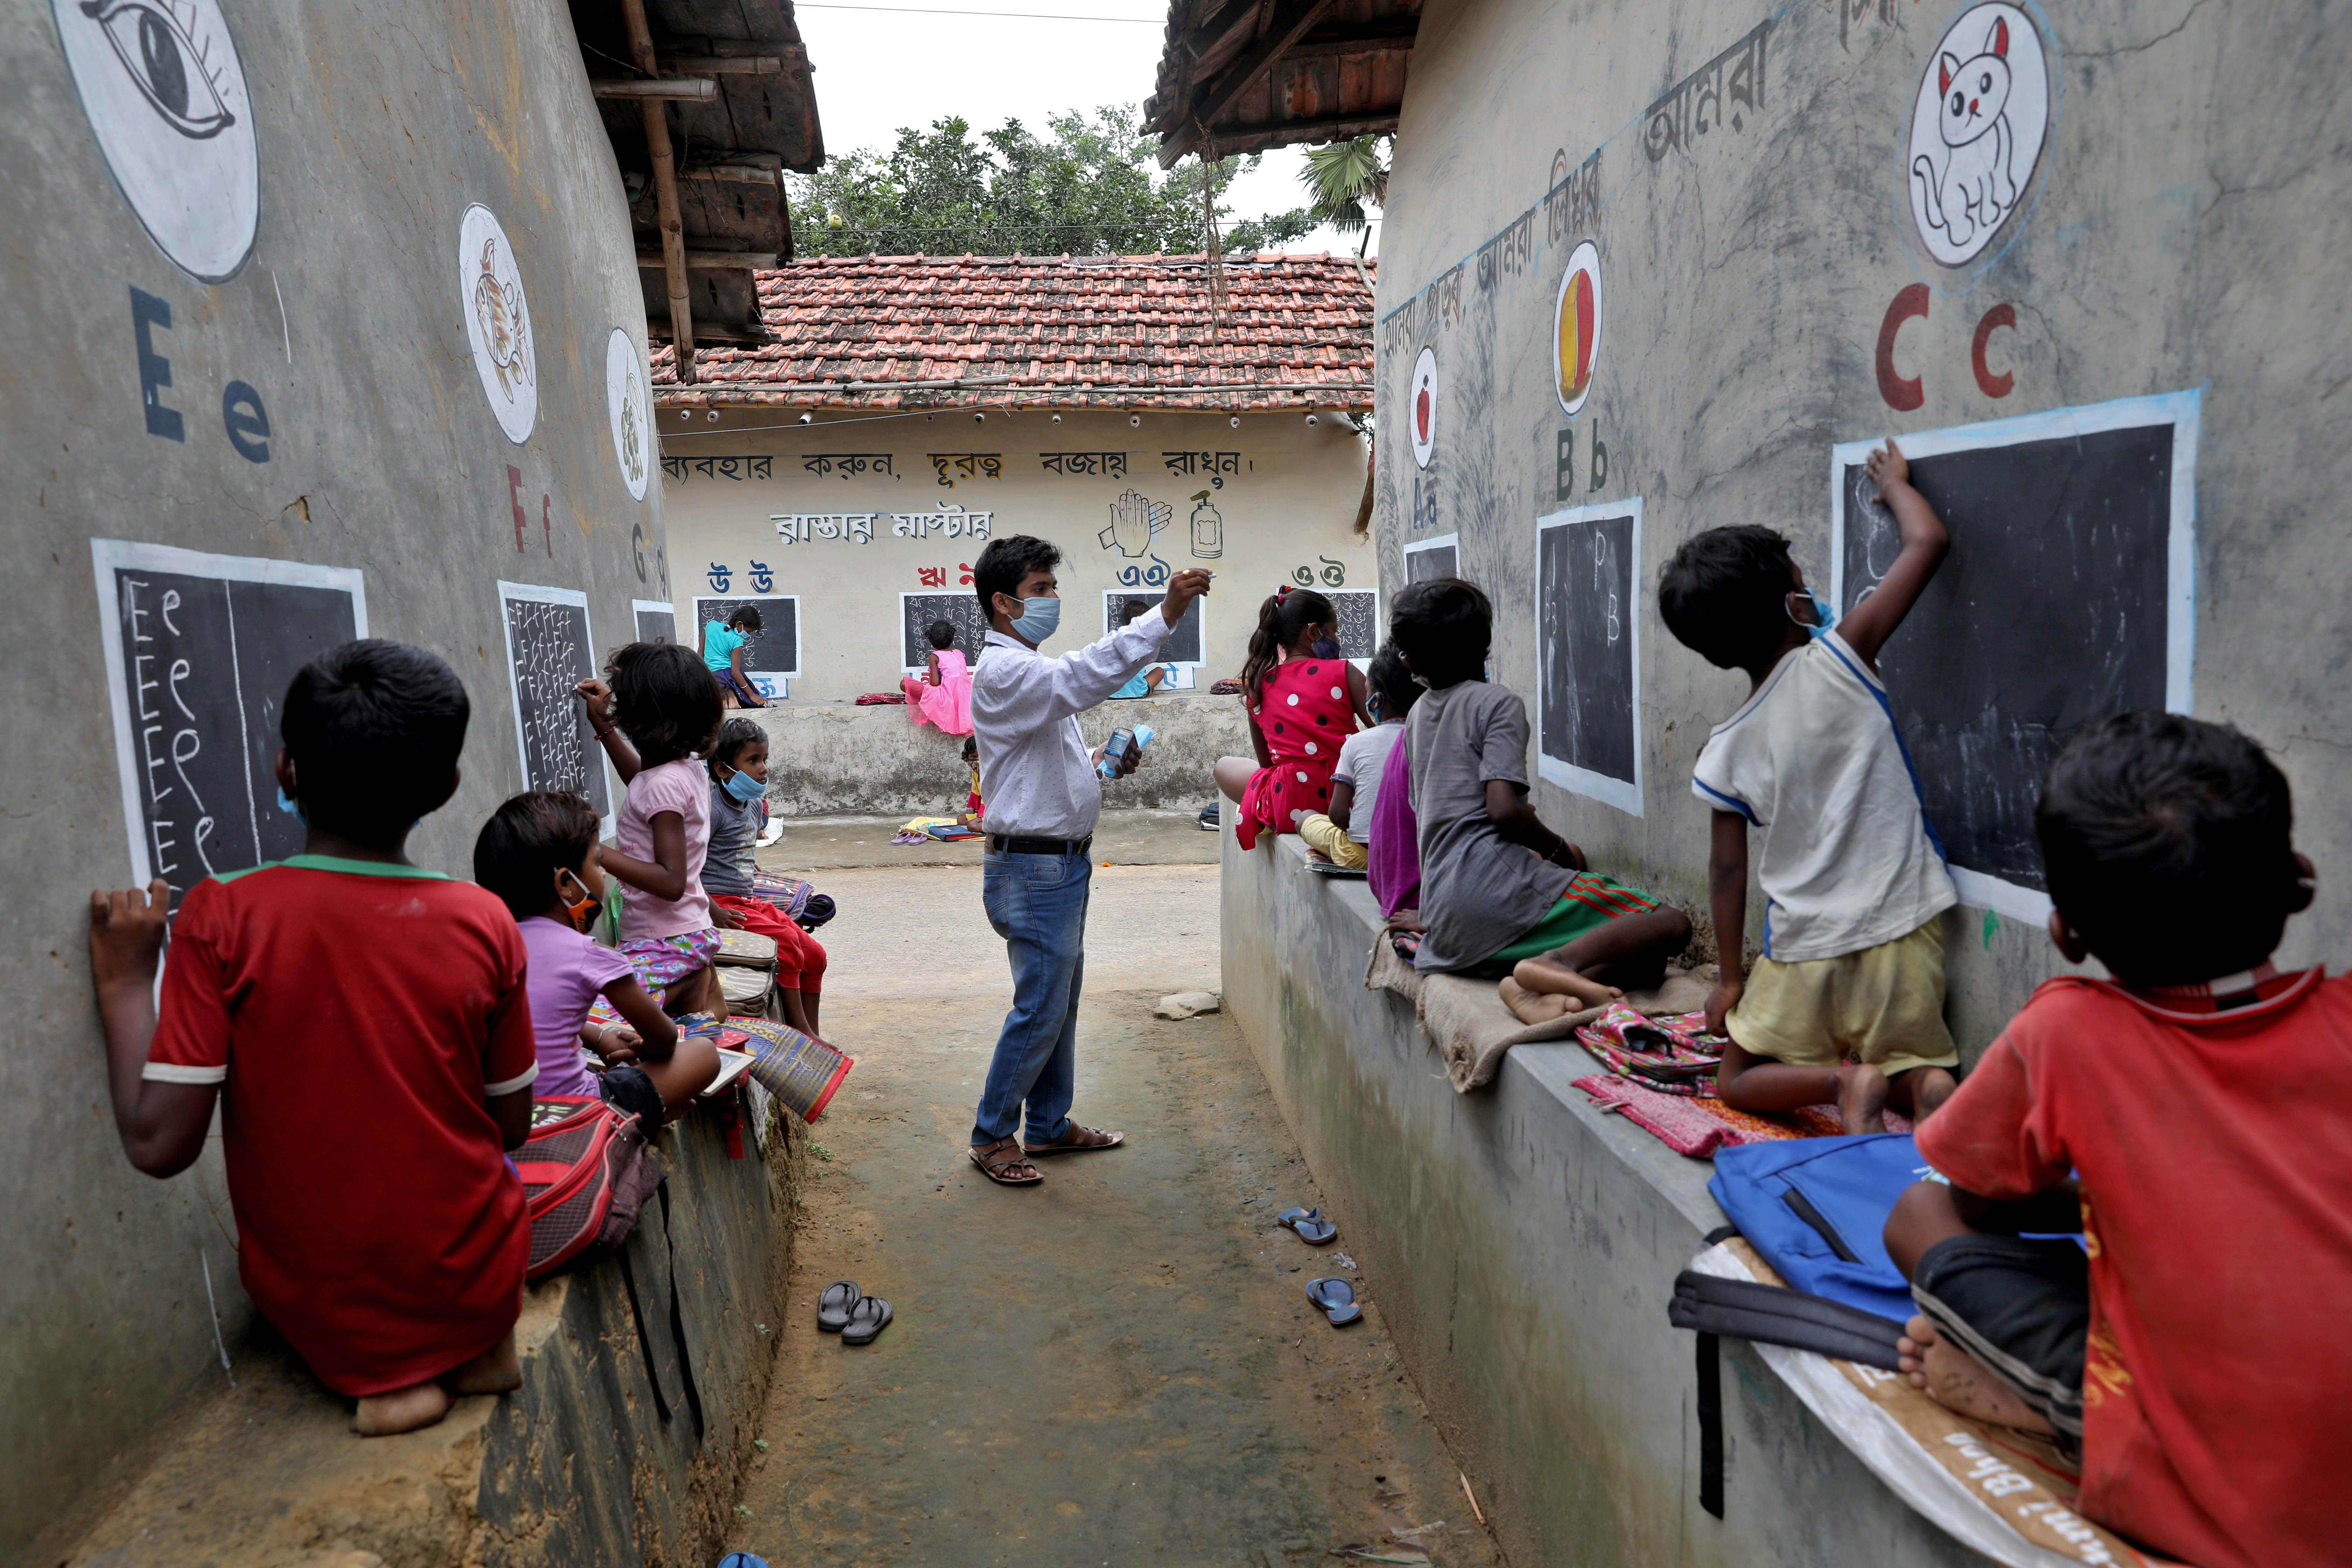 Deep Narayan Nayak teaches children in an open air class outside the houses with the walls converted into black boards at Joba Attpara village